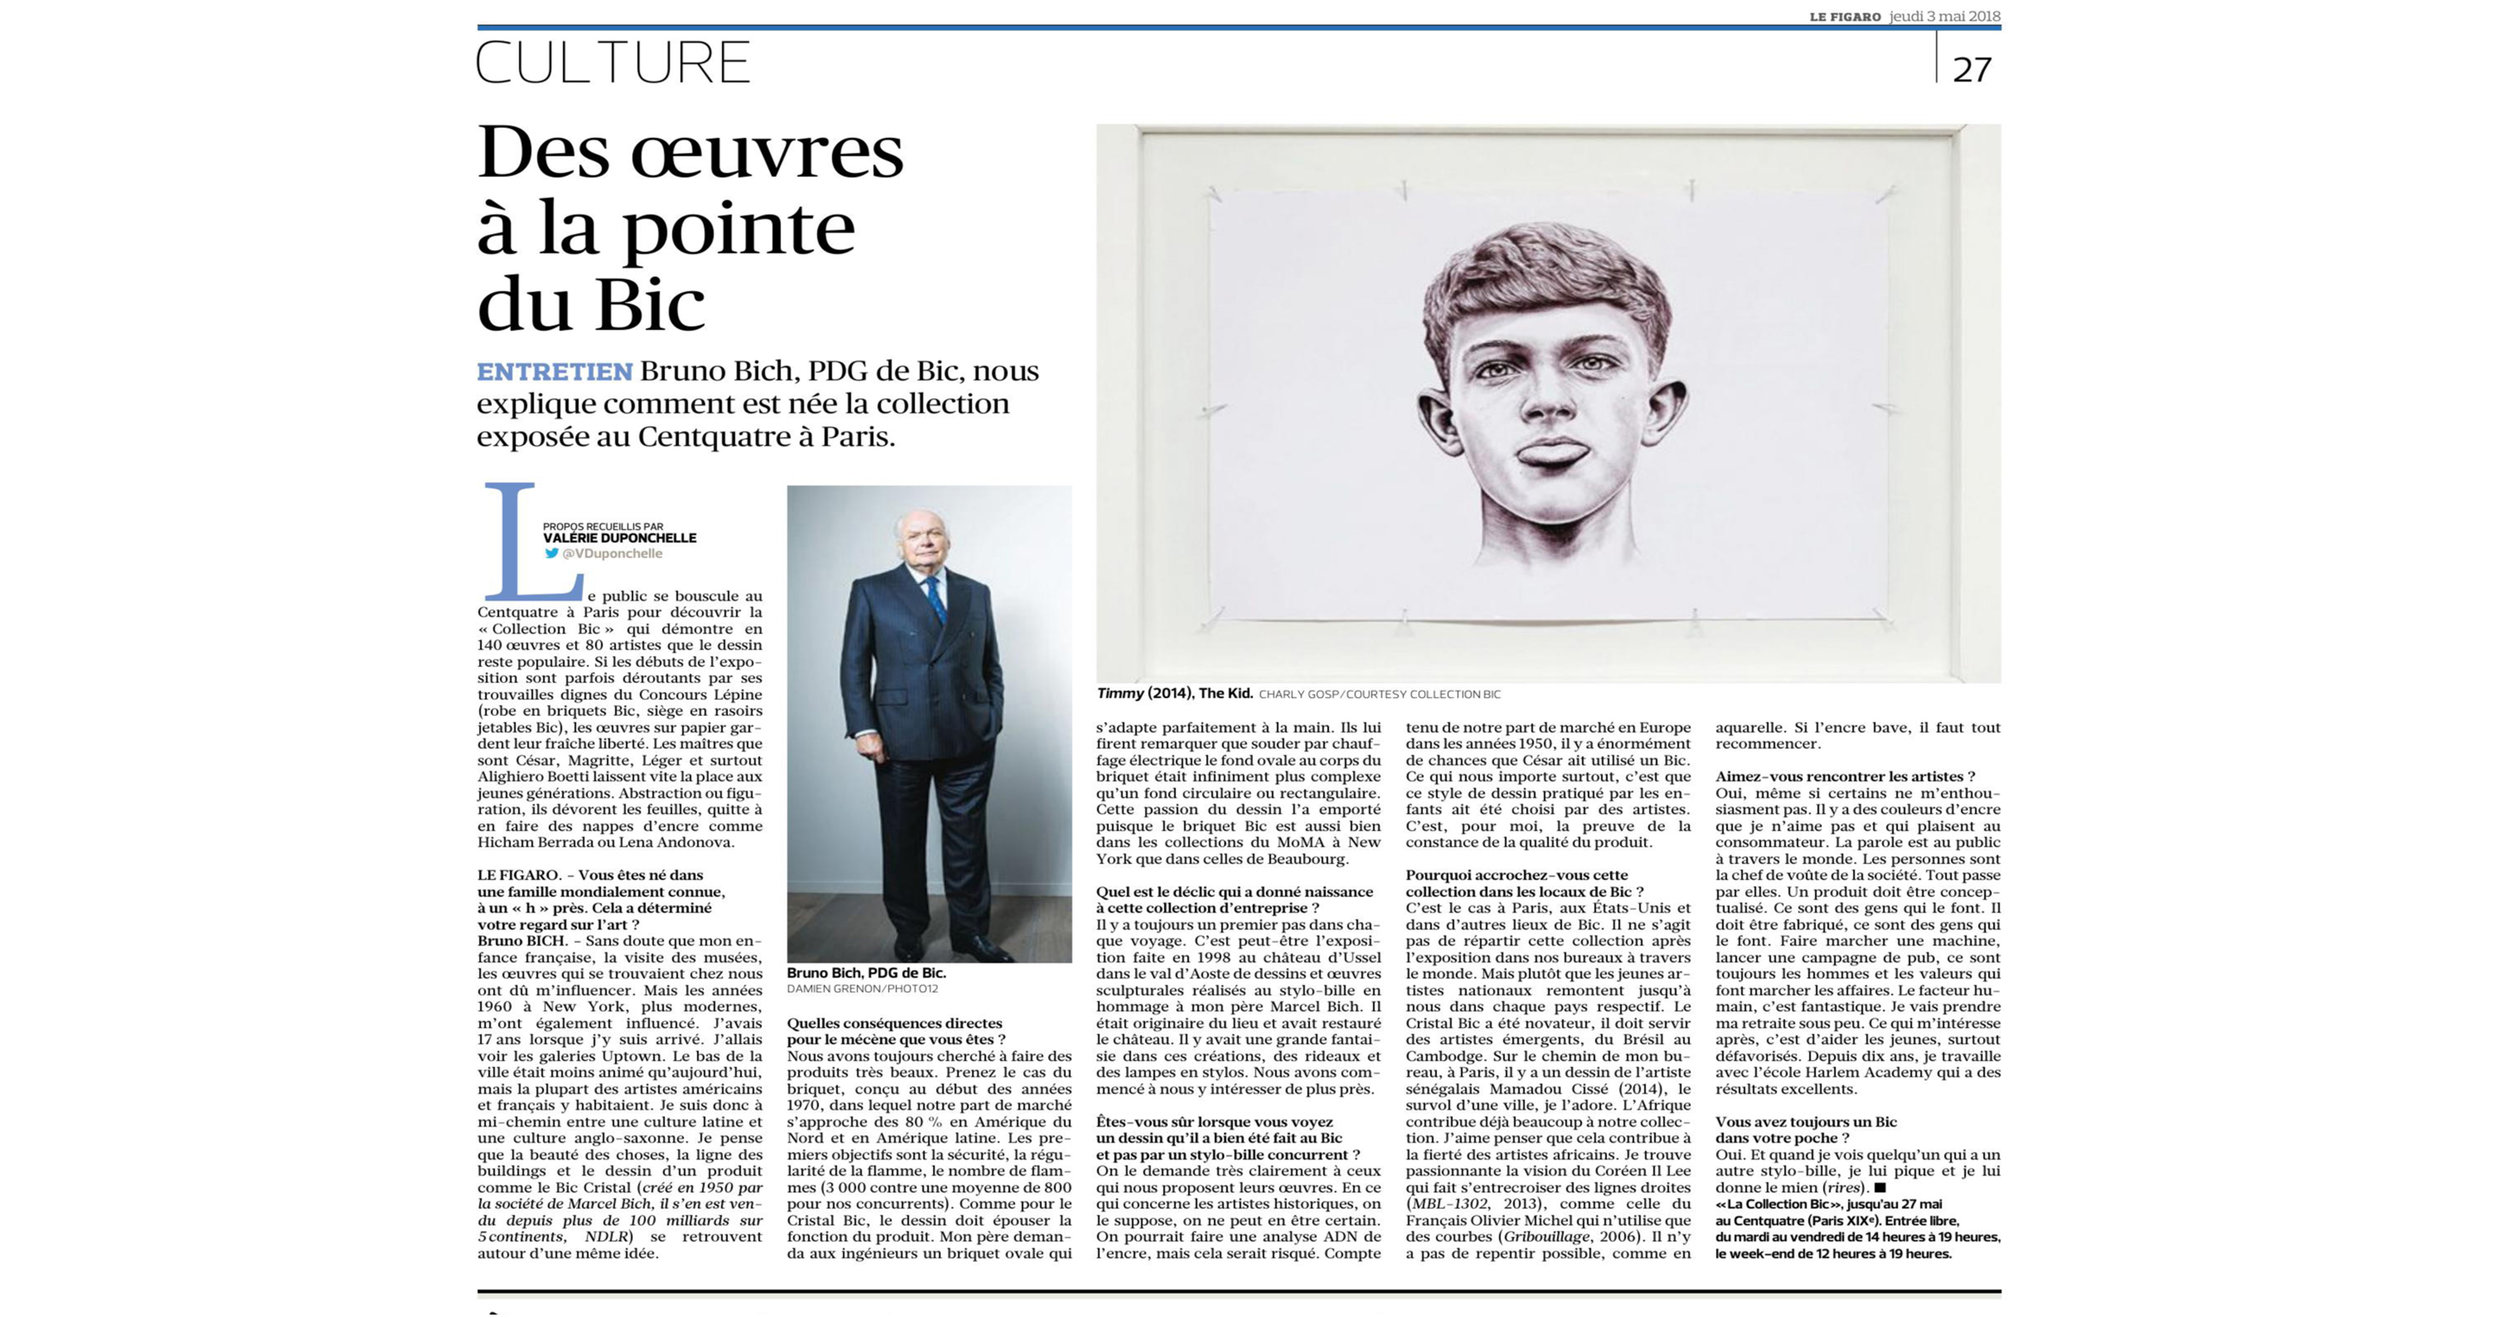 THE KID in LE FIGARO Newspaper - Leading National Daily Newspaper - Print Issue - France - June 03 2018 - Page 27 - Page 27 copie - Article.jpg